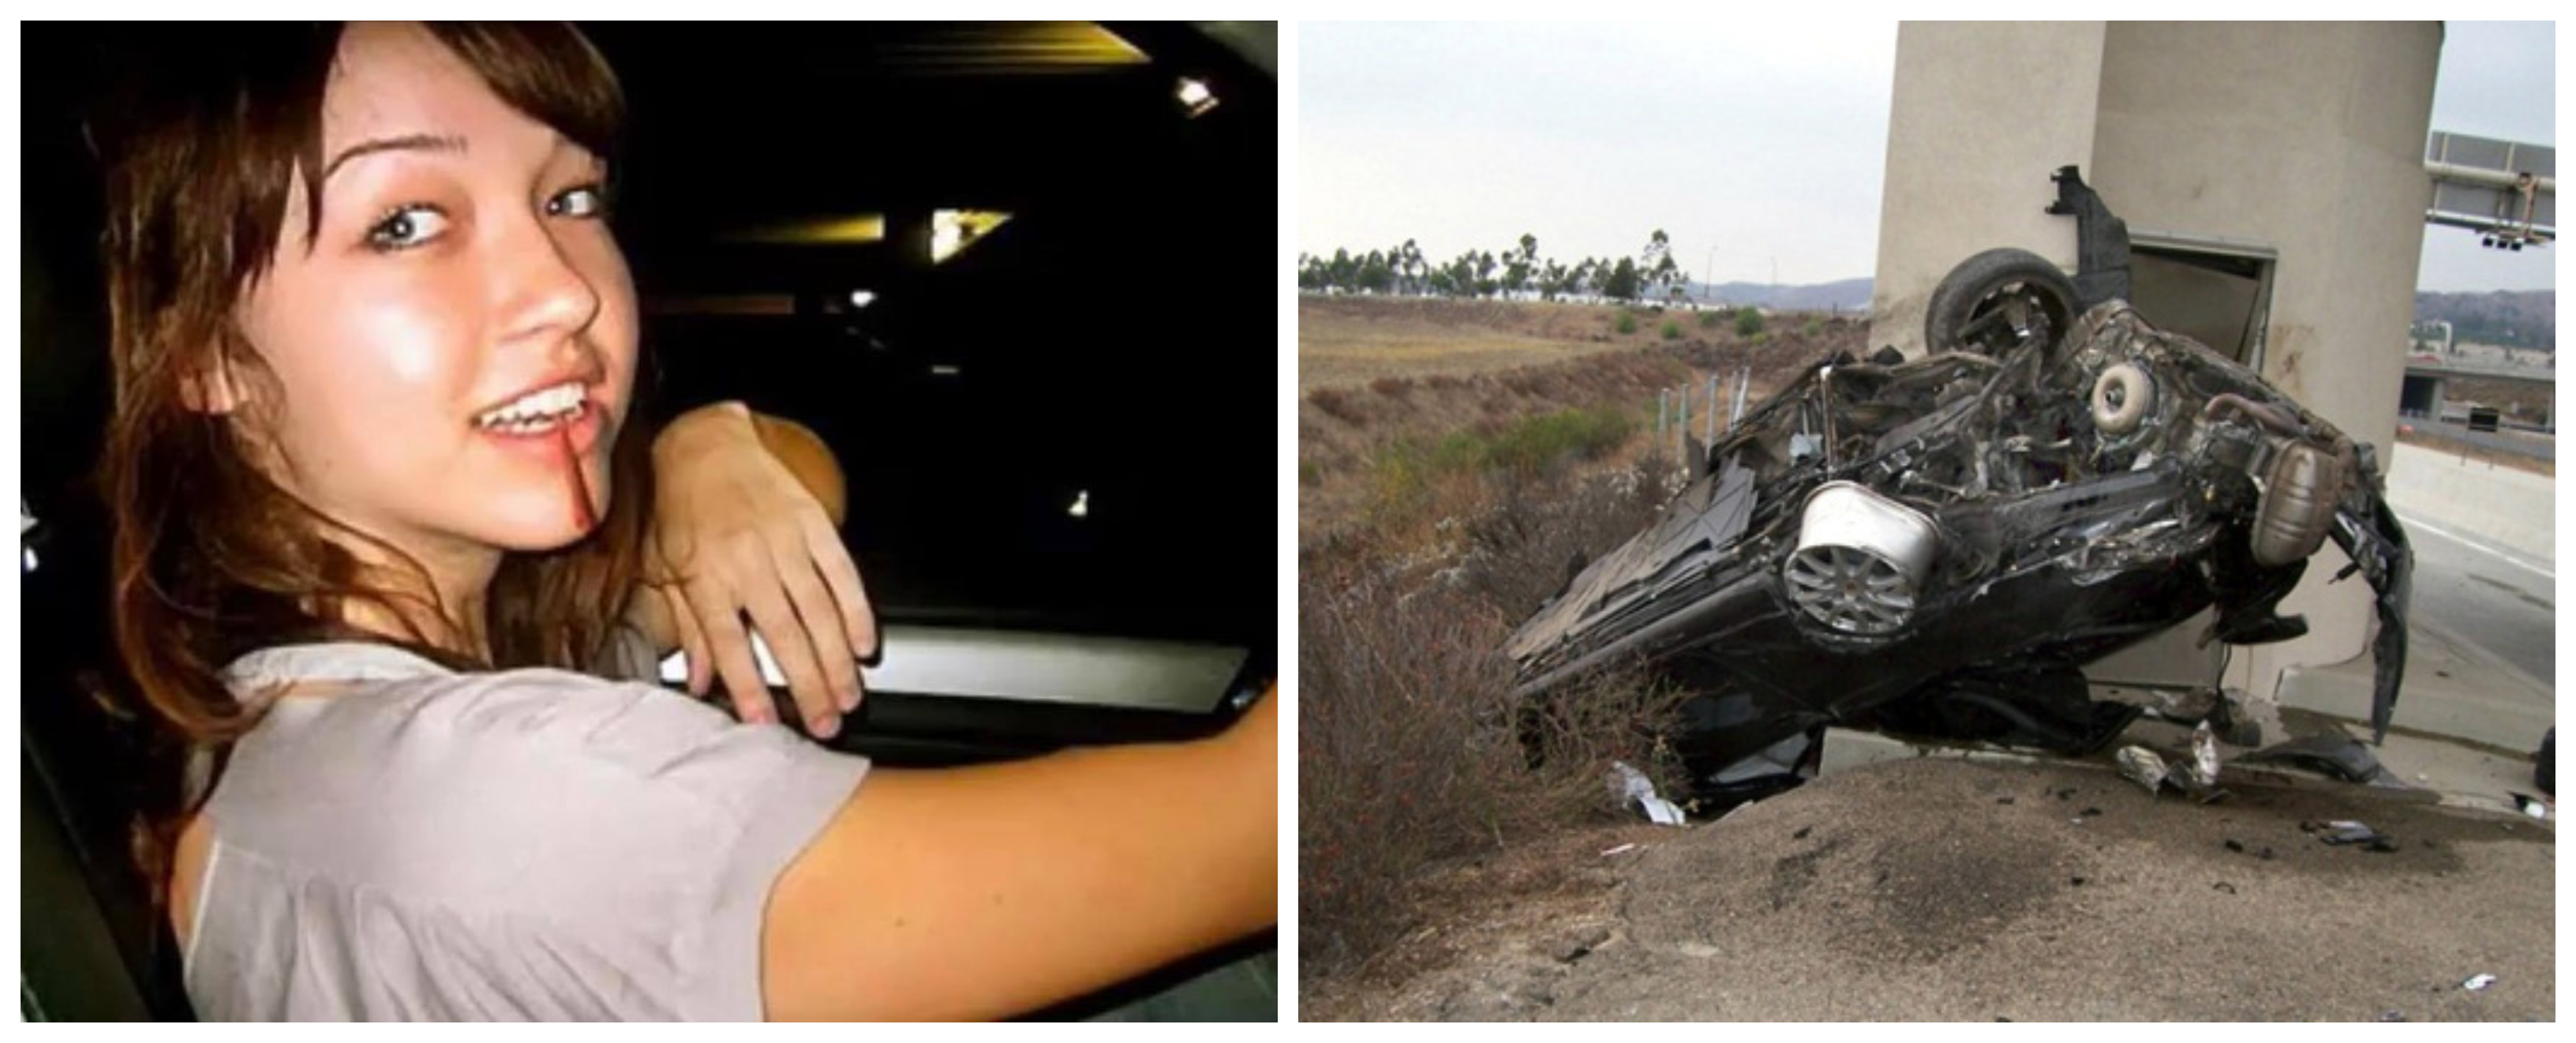 Nikki Catsura - Pictures Of Her Brutal Car Accident Gets Leaked